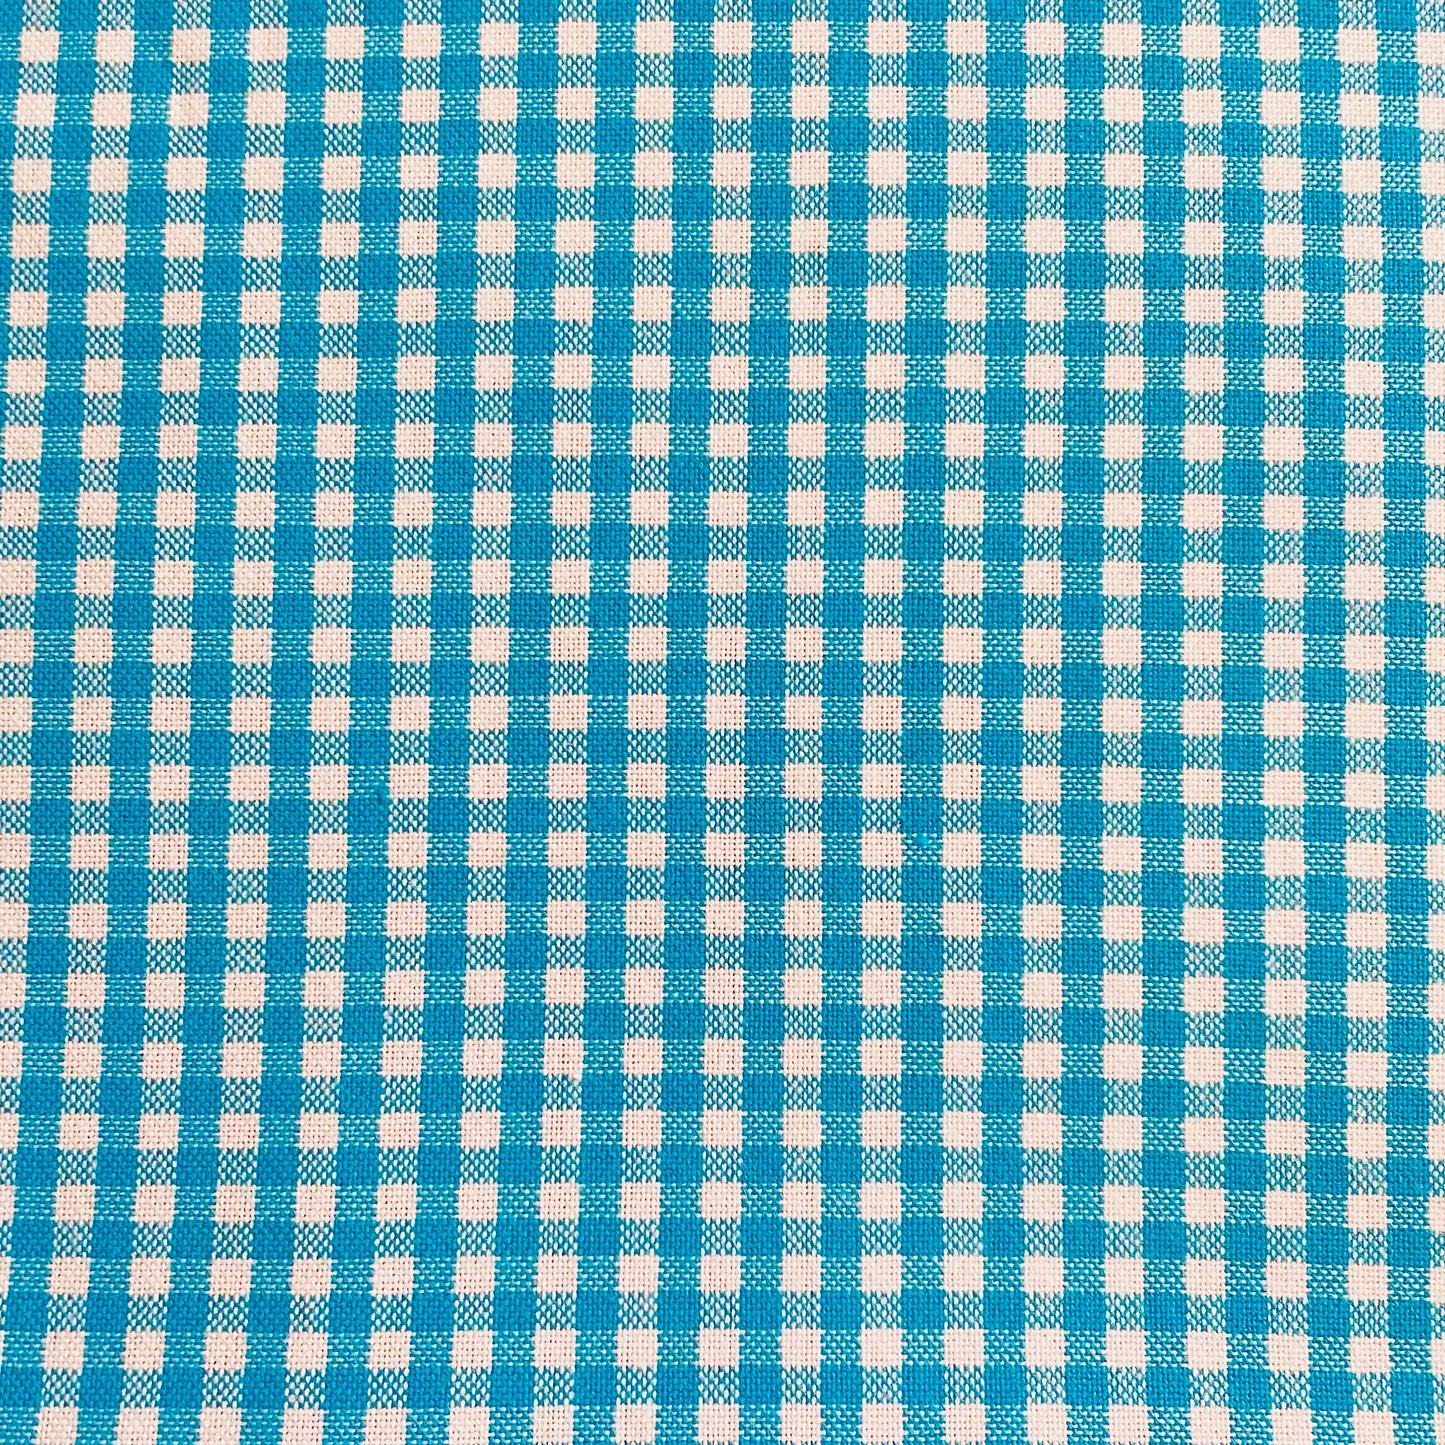 Stand Mixer Bowl Covers - Turquoise Gingham Check